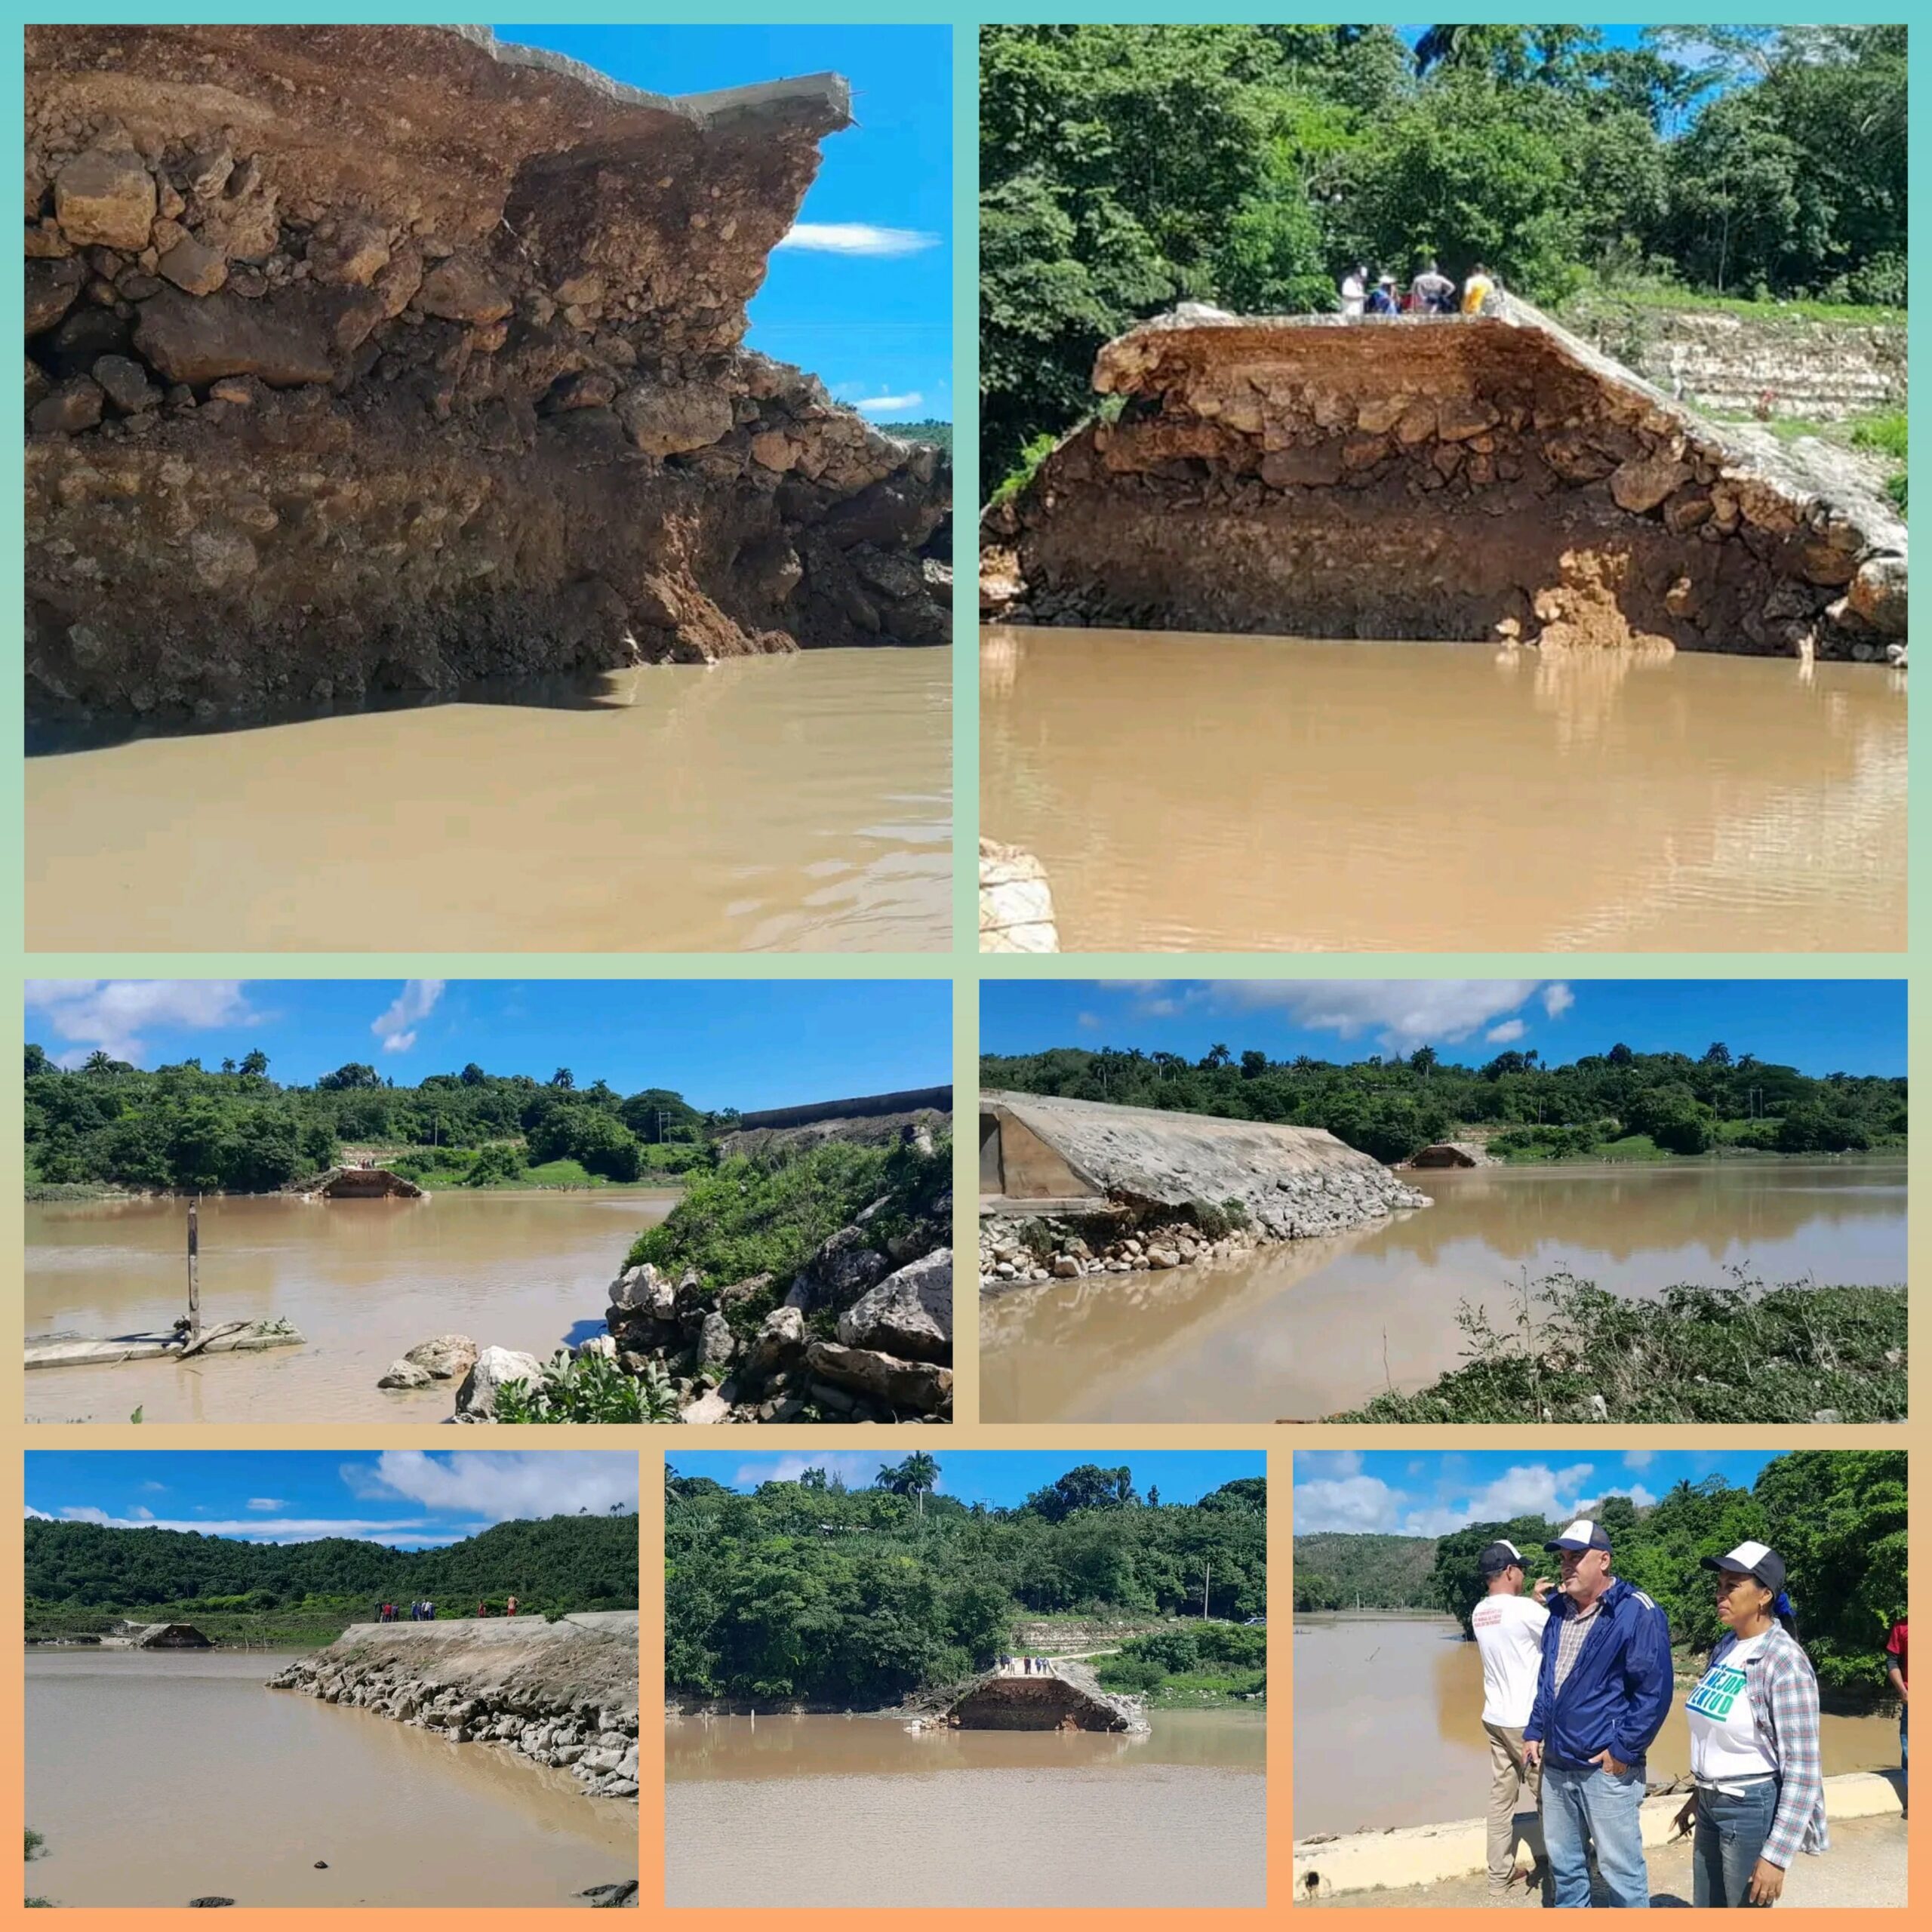 Bridge in the spillway of the Mayarí dam, collapsed 